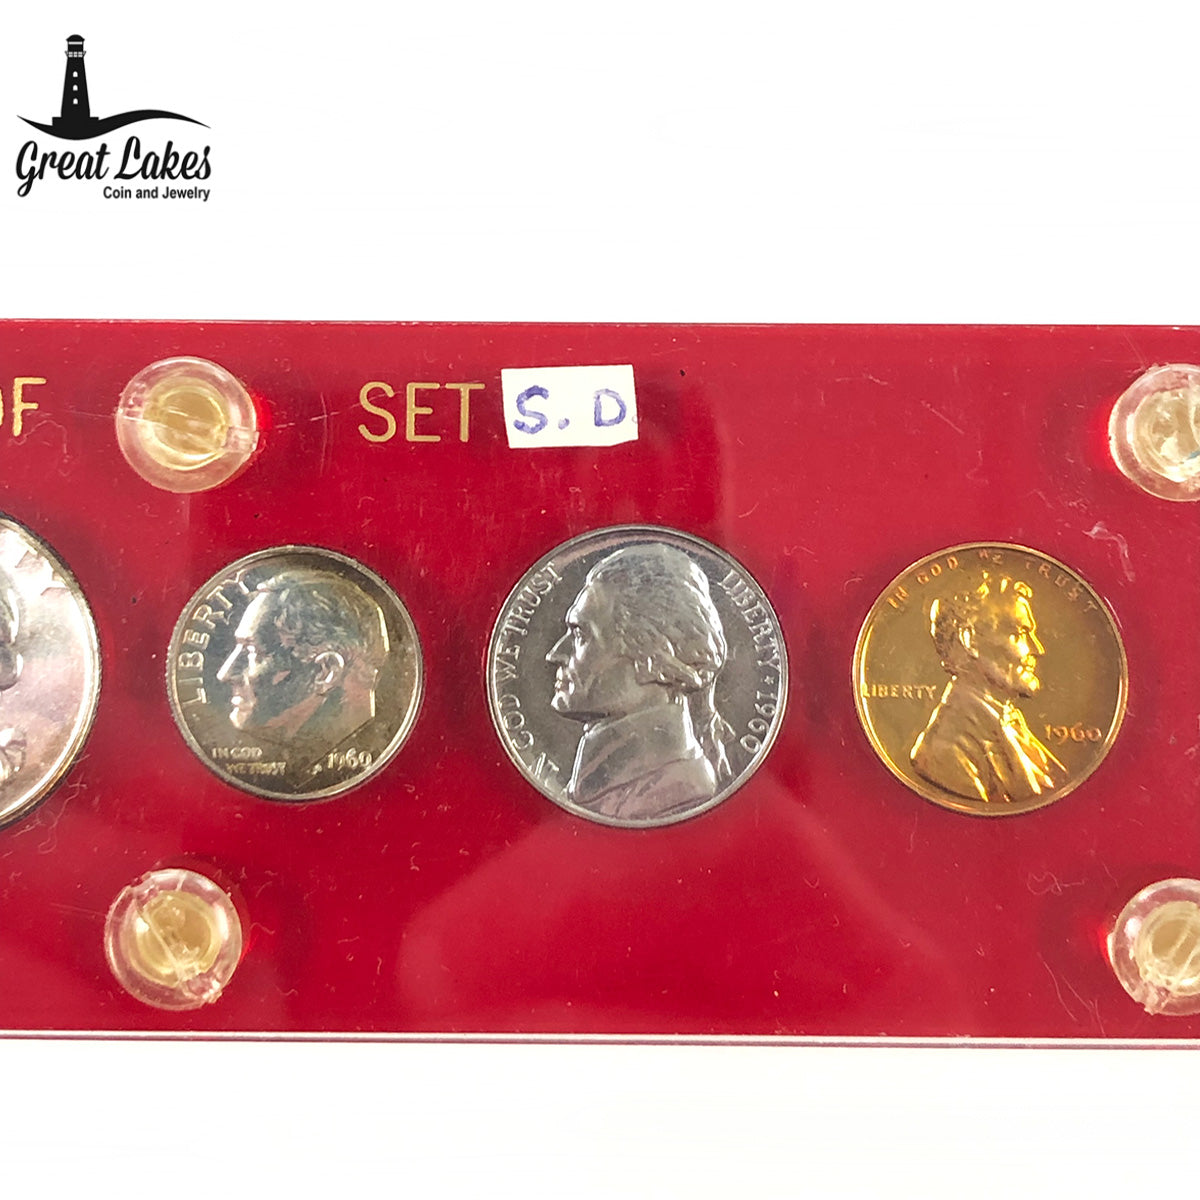 1960 Small Date Proof Set in a Capitol Plastic Holder